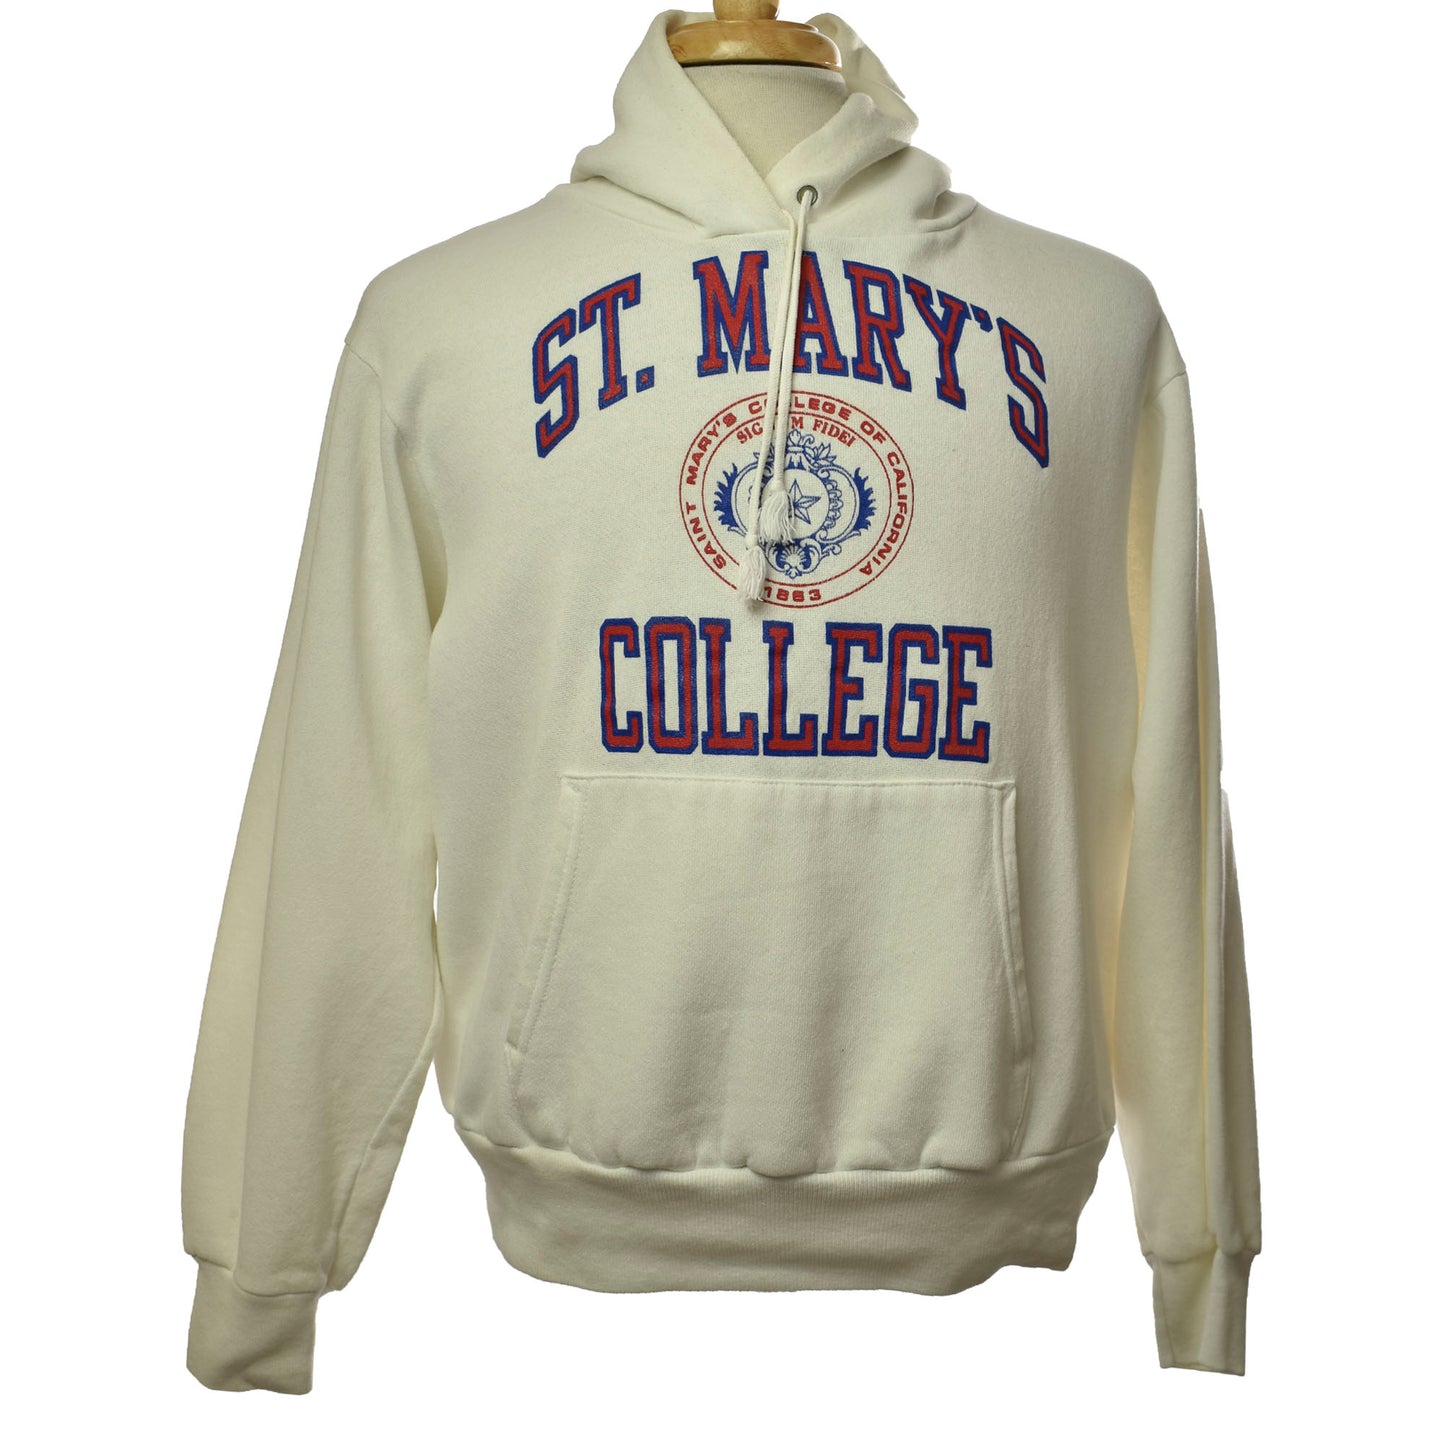 Vintage 80s Champion St Mary's College Size L Hoodie